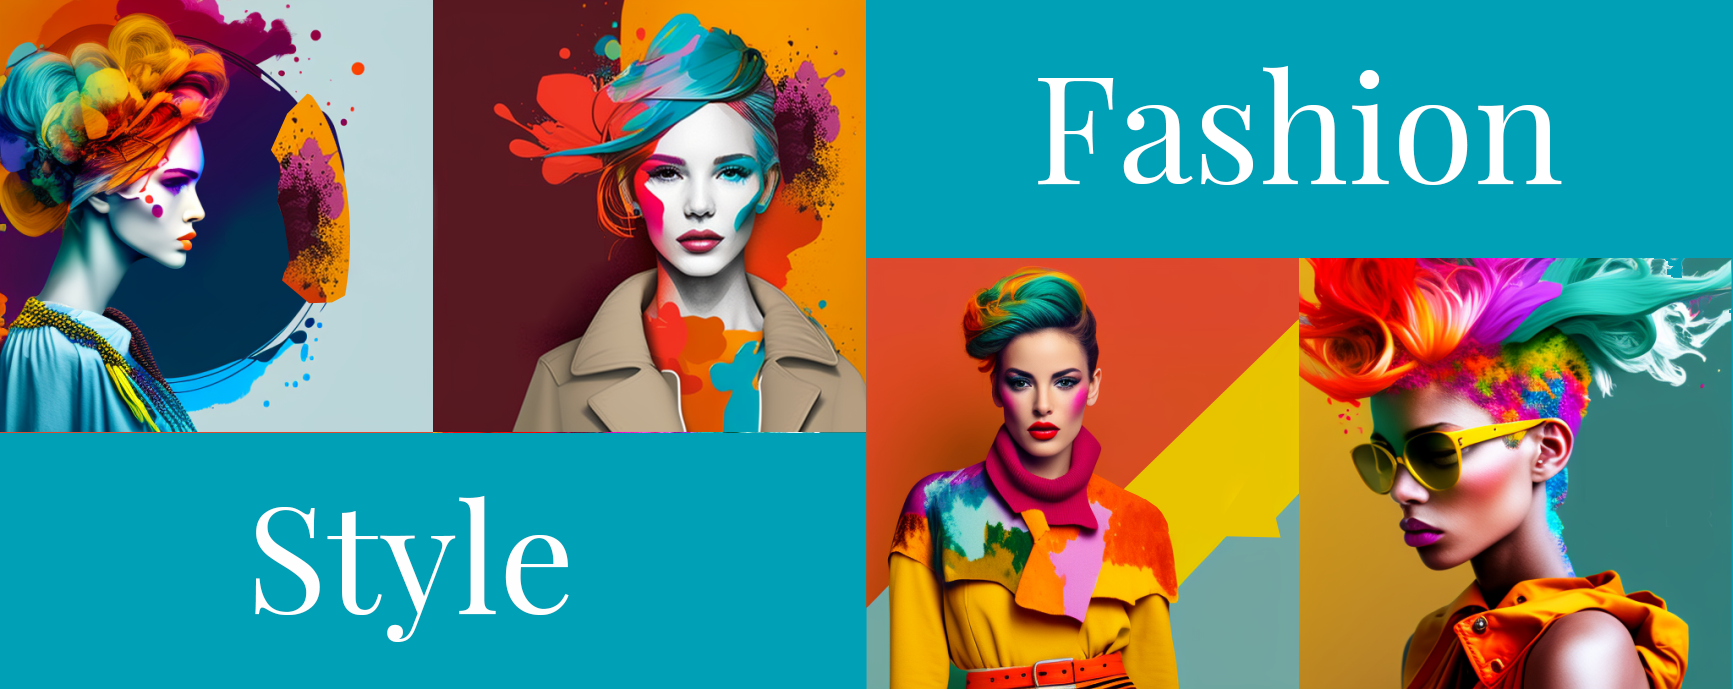 Strictly Influential: Fashion Style Banner